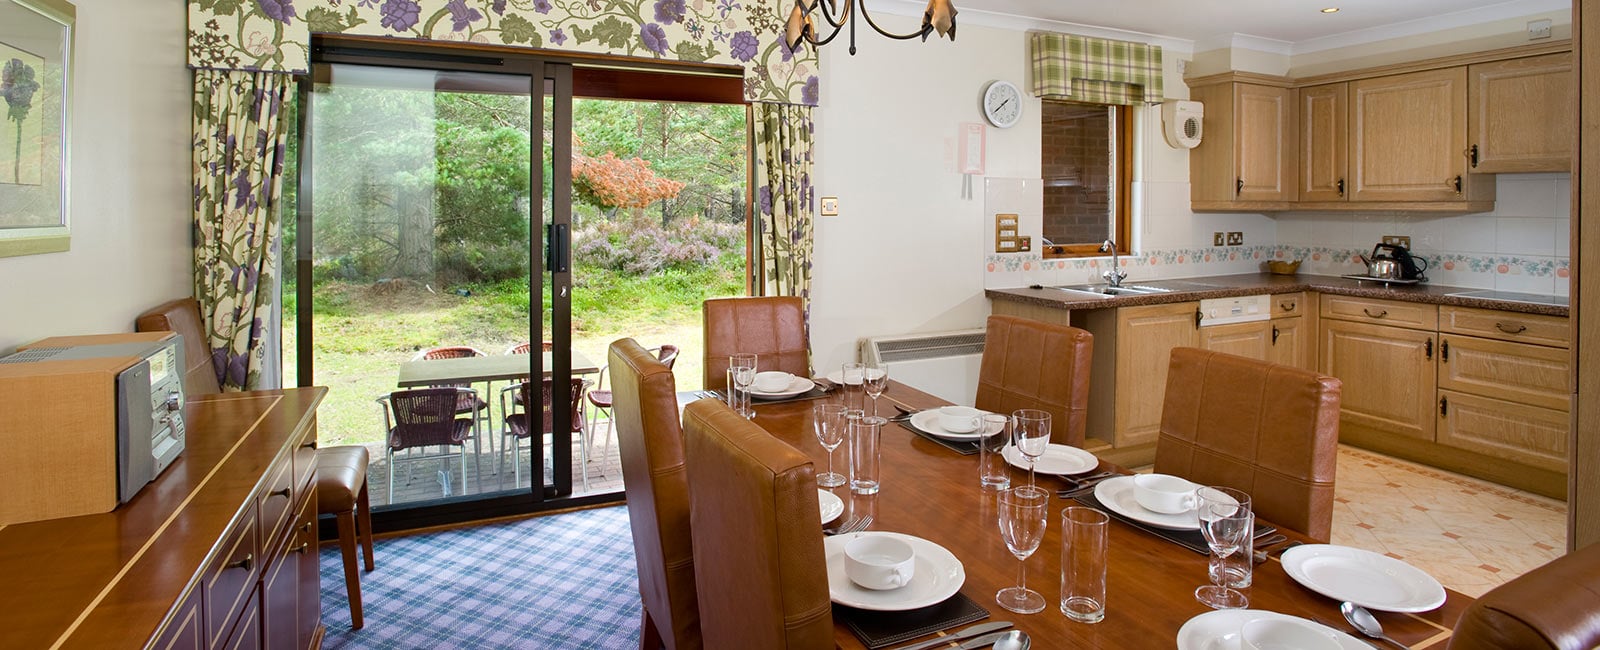 Dining Area at Hilton Grand Vacations Club at Coylumbridge in Inverness-shire, Scotland